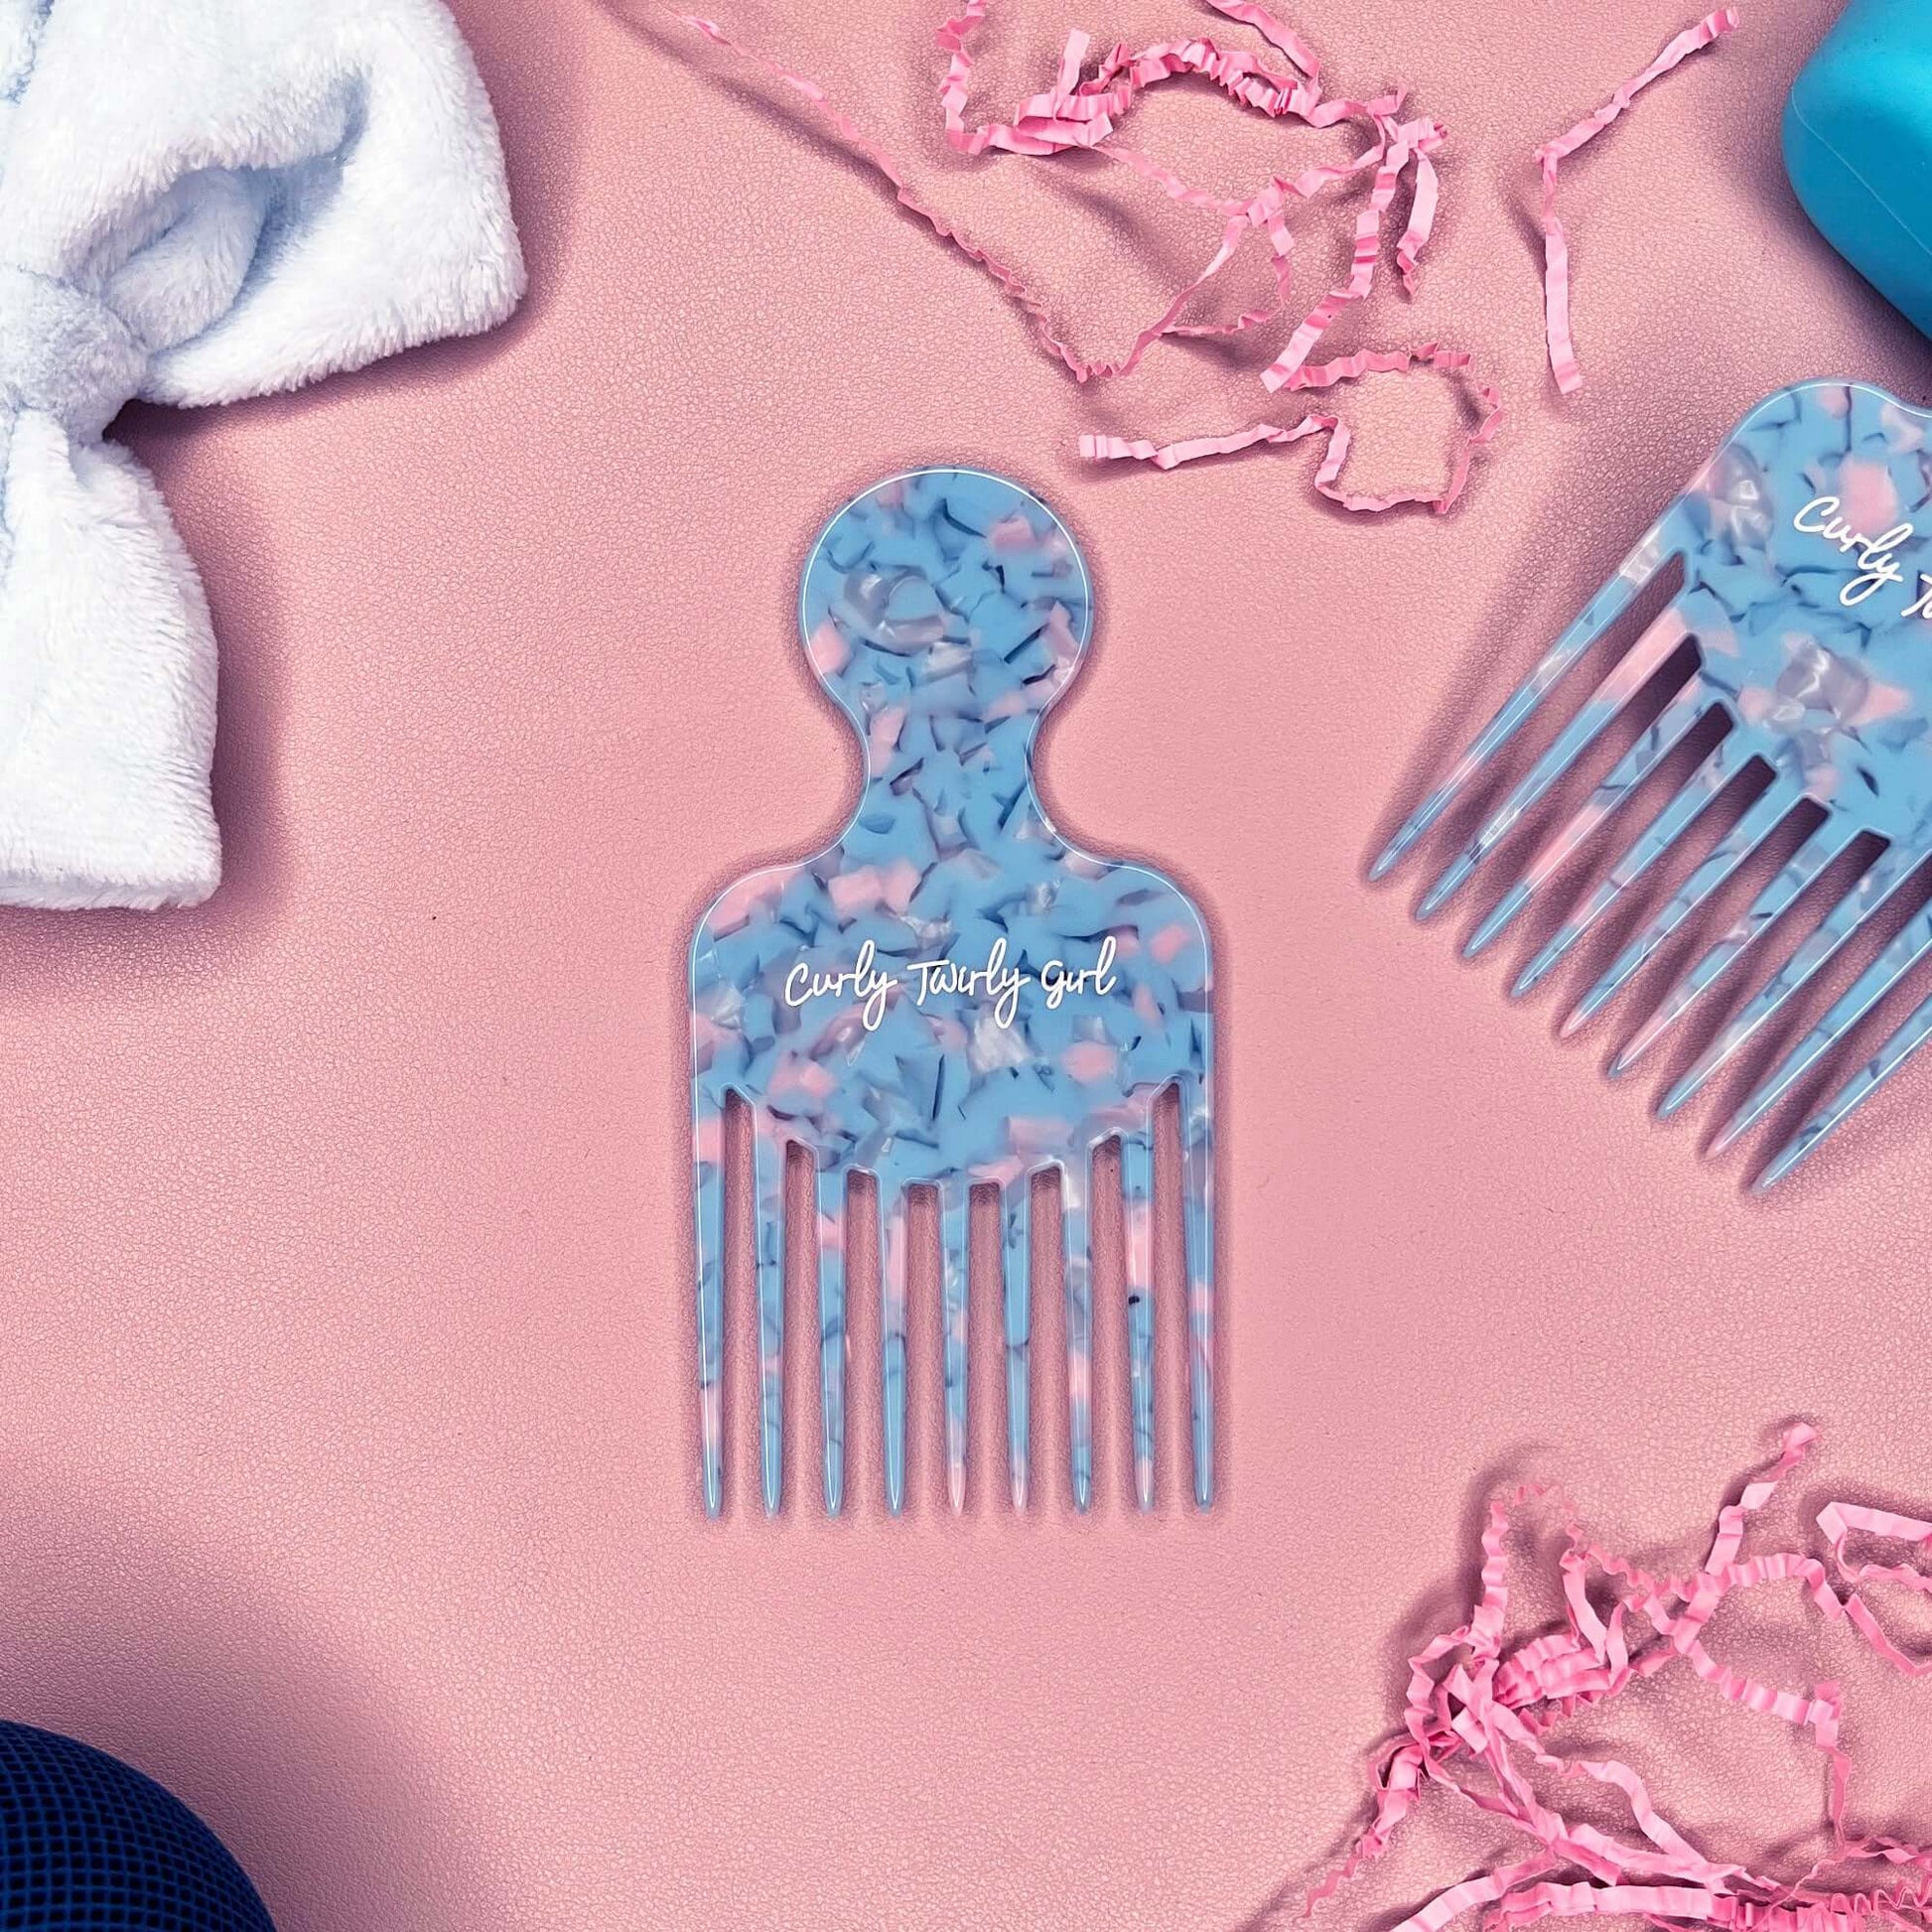 Blue afro hair comb on pink table